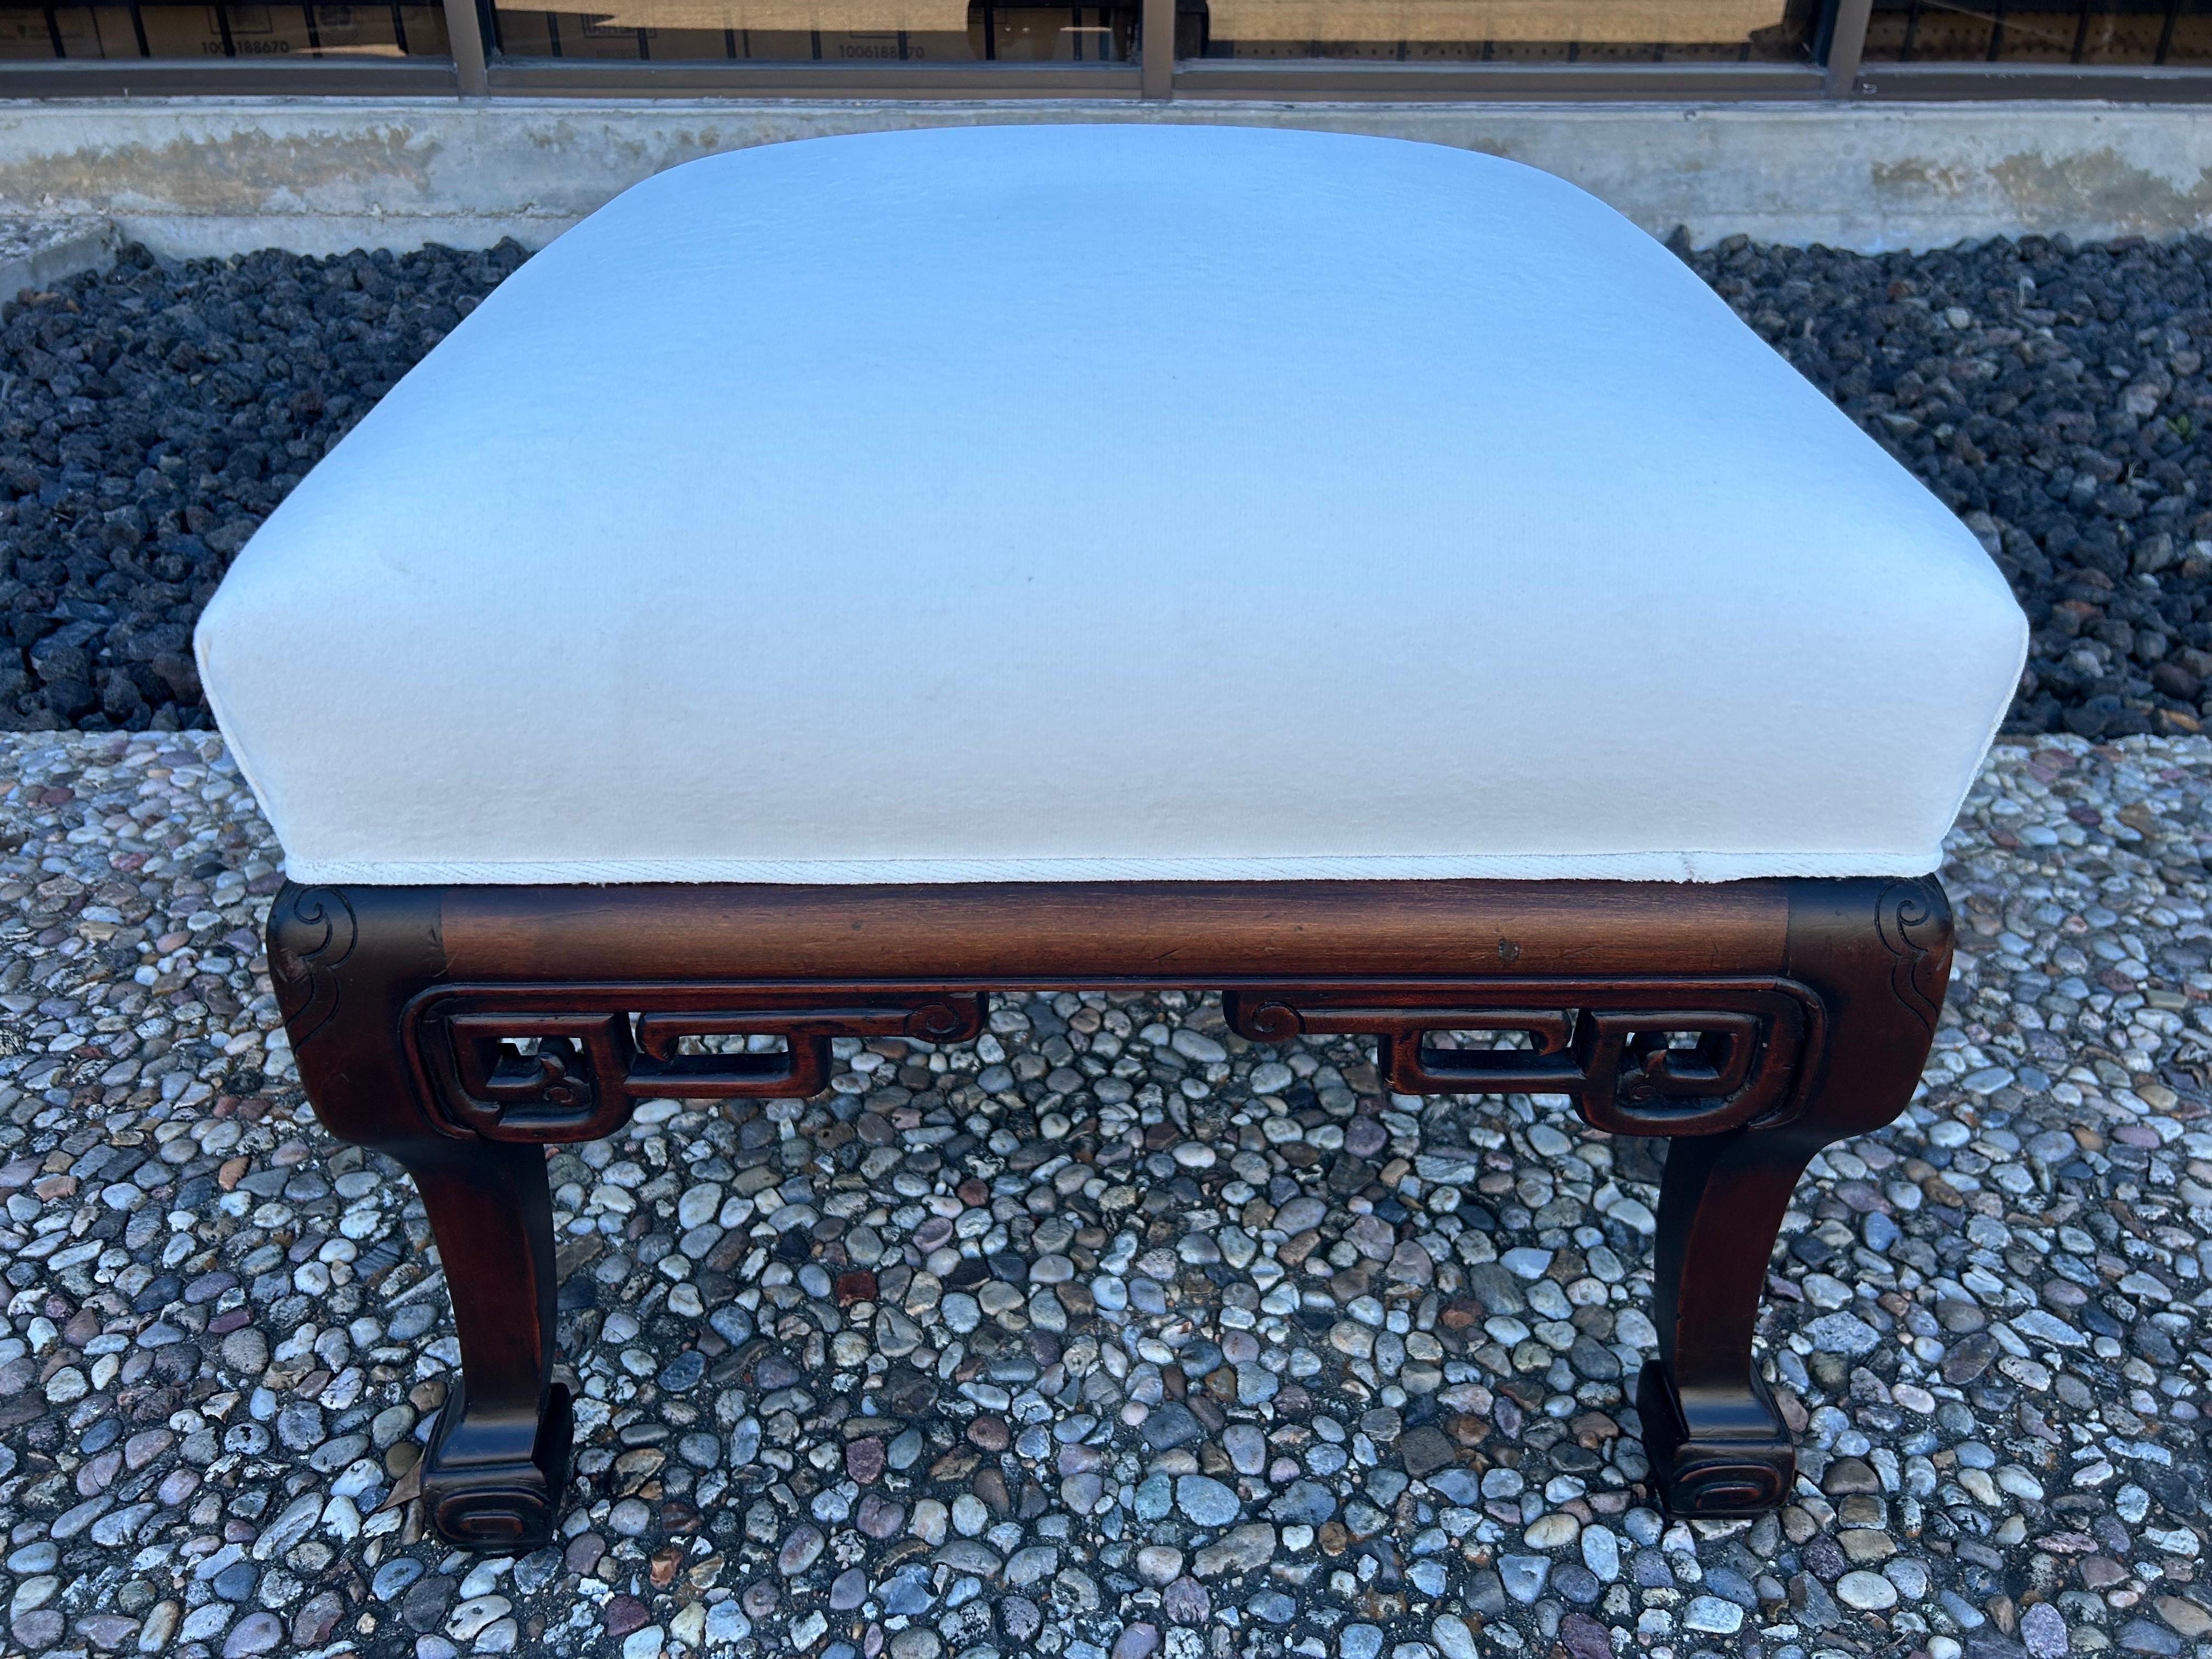 Antique Chinese Square Bench or Ottoman.
This versatile antique Chinese Rosewood bench or ottoman is in good condition and perfect for extra seating where needed.
Comfortable and great lines!